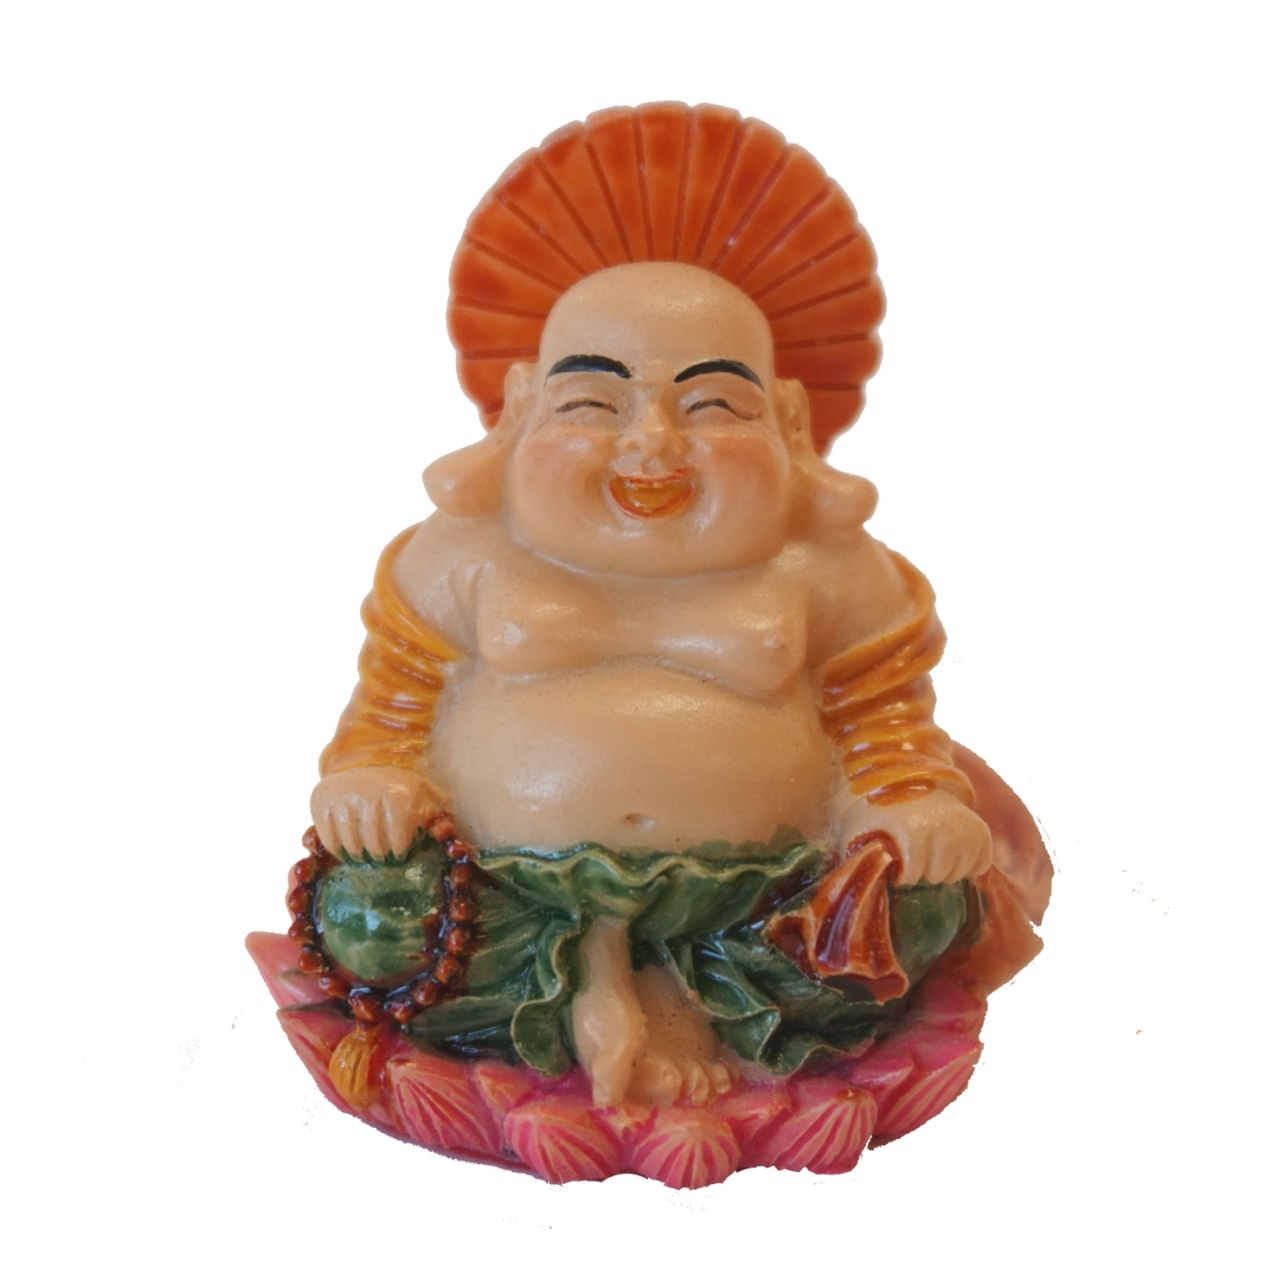 Laughing Buddha Bring Good Luck and Wealth1265 x 1280